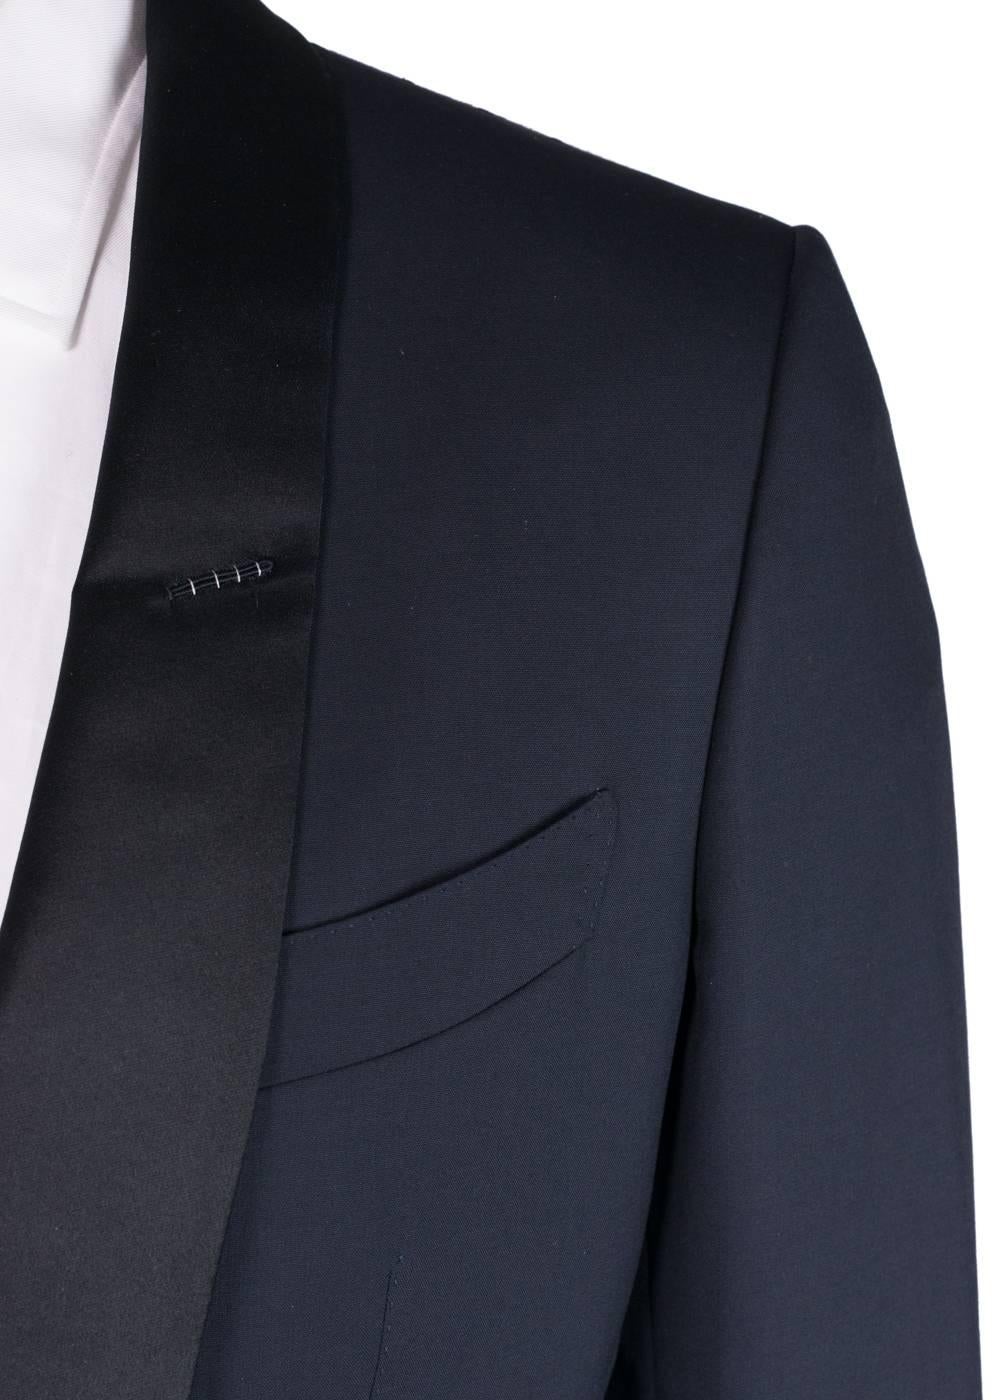 Brand New Tom Ford O'Connor Tuxedo
Original Tags & Hanger Included
Retails In-Stores & Online for $5470
IT 50R / US 40 

A signature tuxedo, Tom Ford's Satin Shawl Lapel 'O'Connor' Base Tuxedo is crafted from a luxury twill fabric in deep navy. This